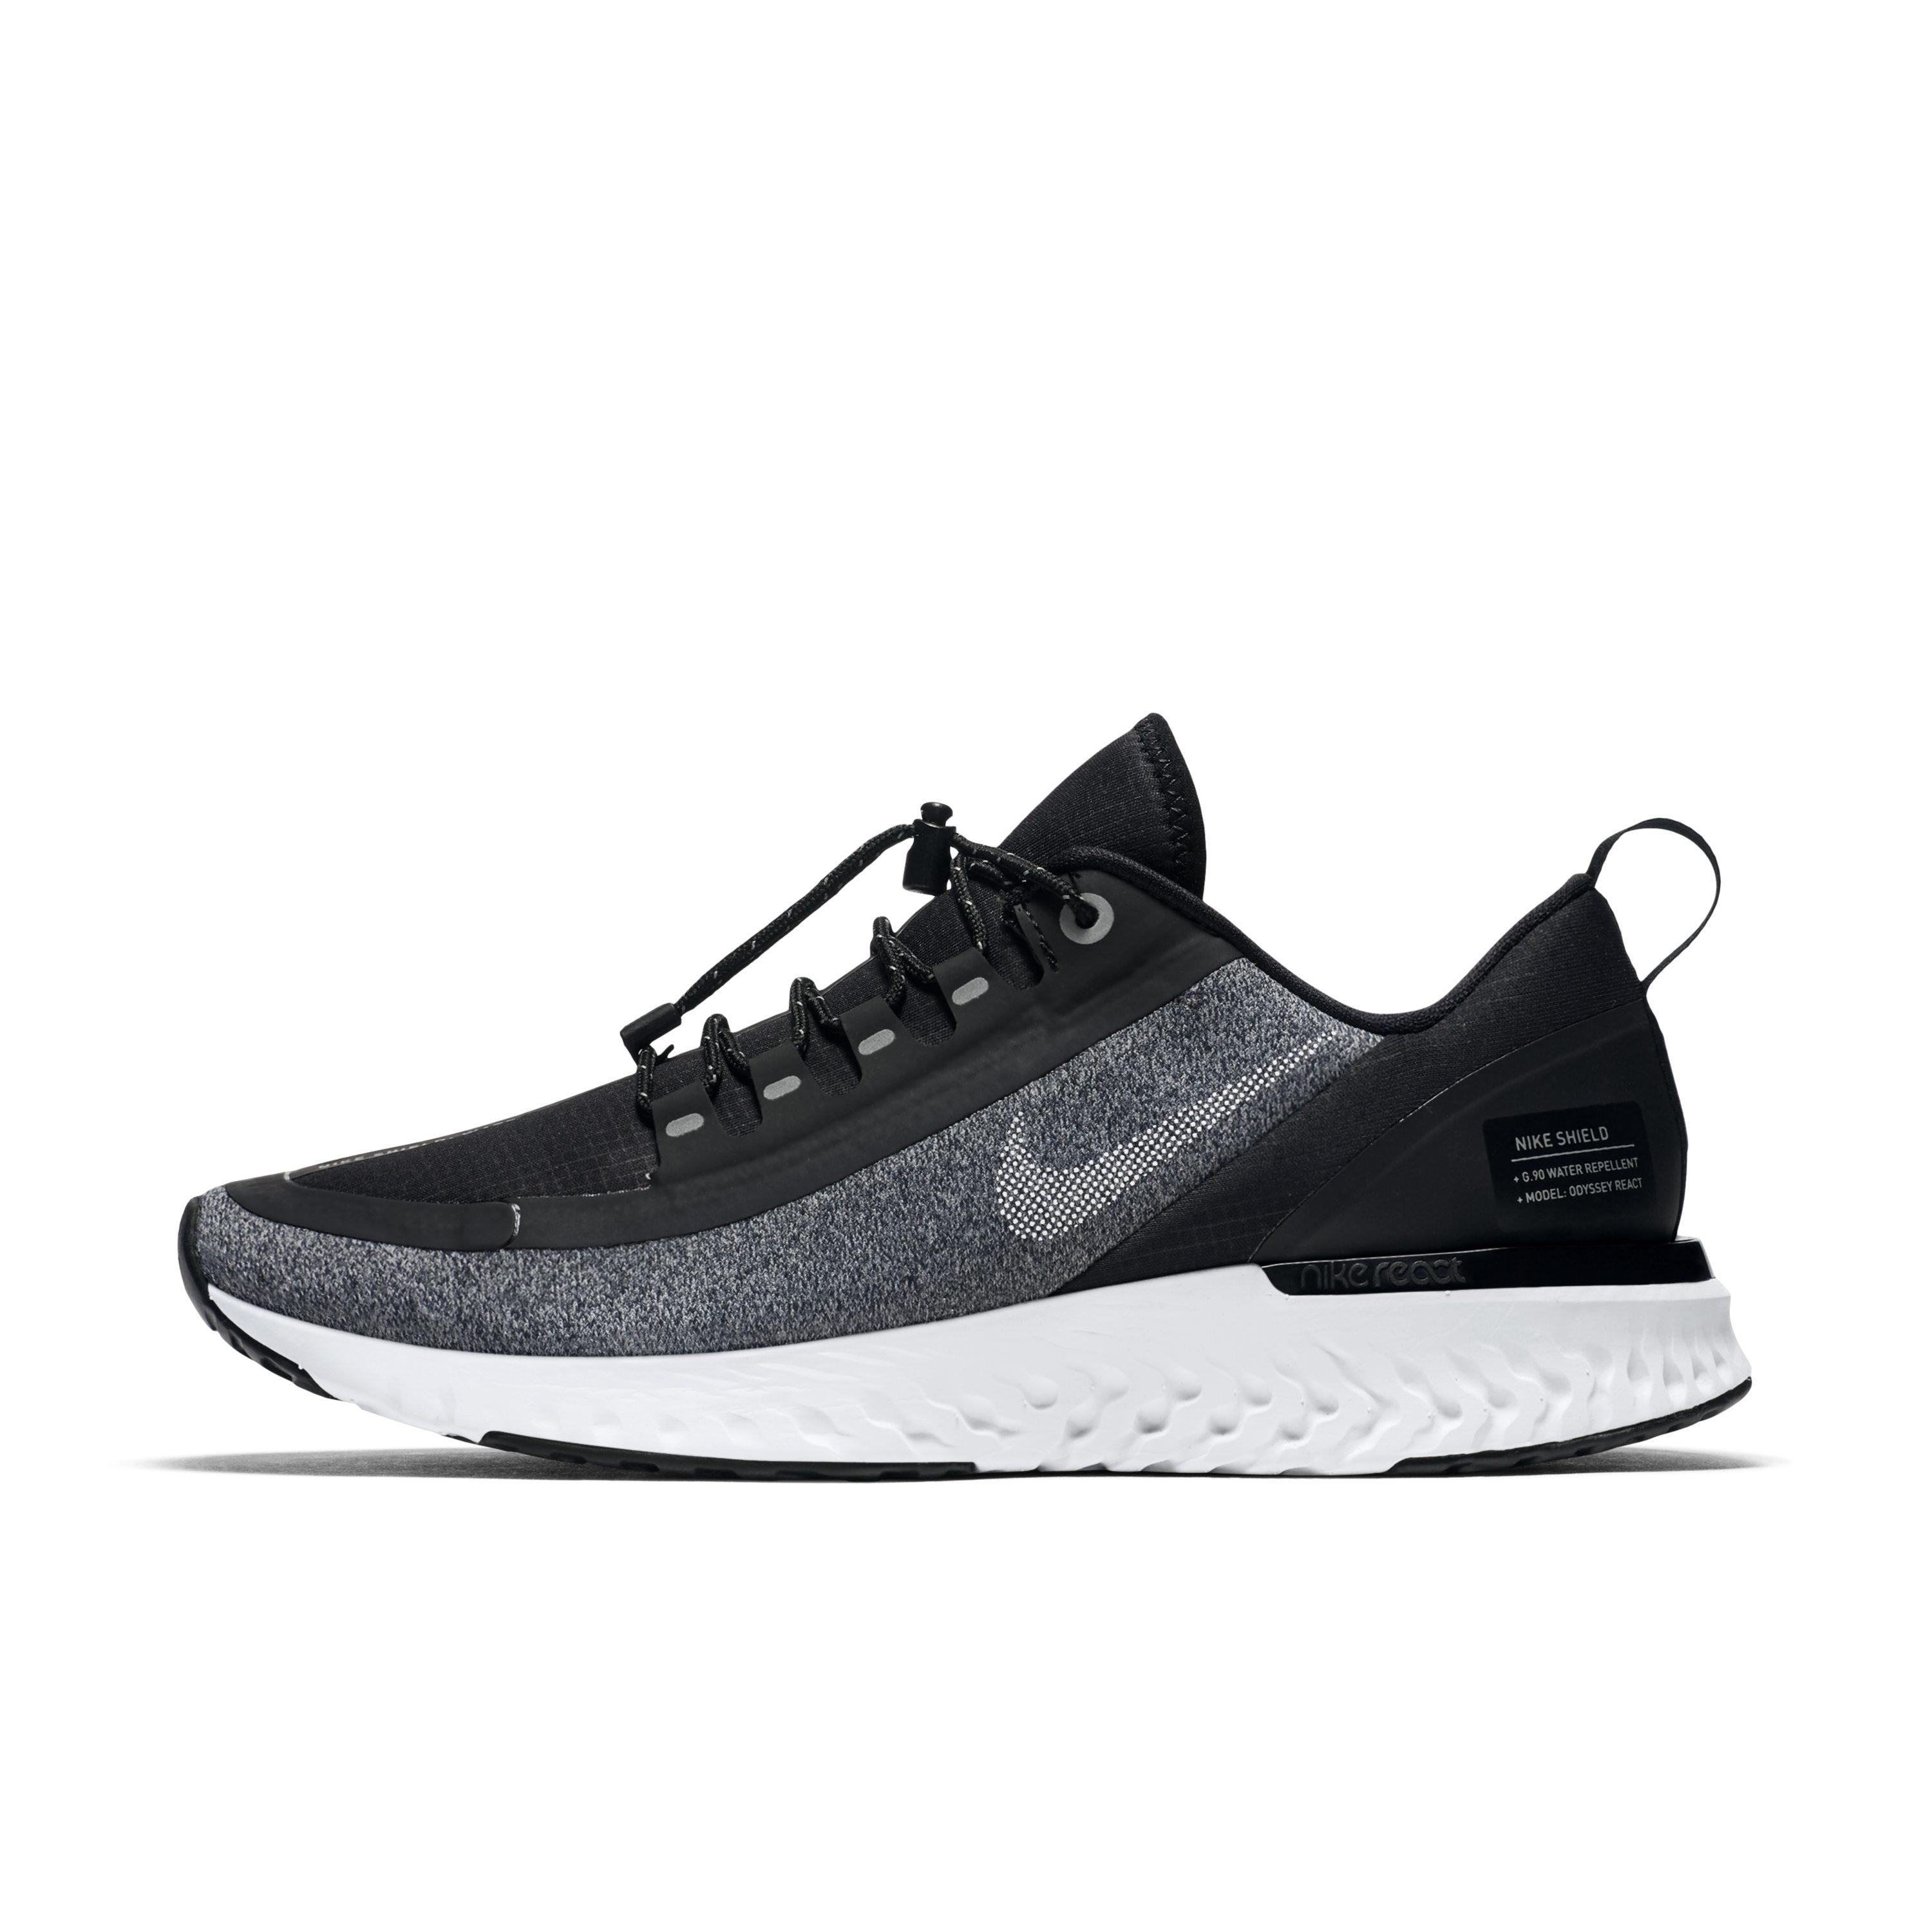 Nike Odyssey React Shield Water-repellent Running Shoe in Black - Lyst